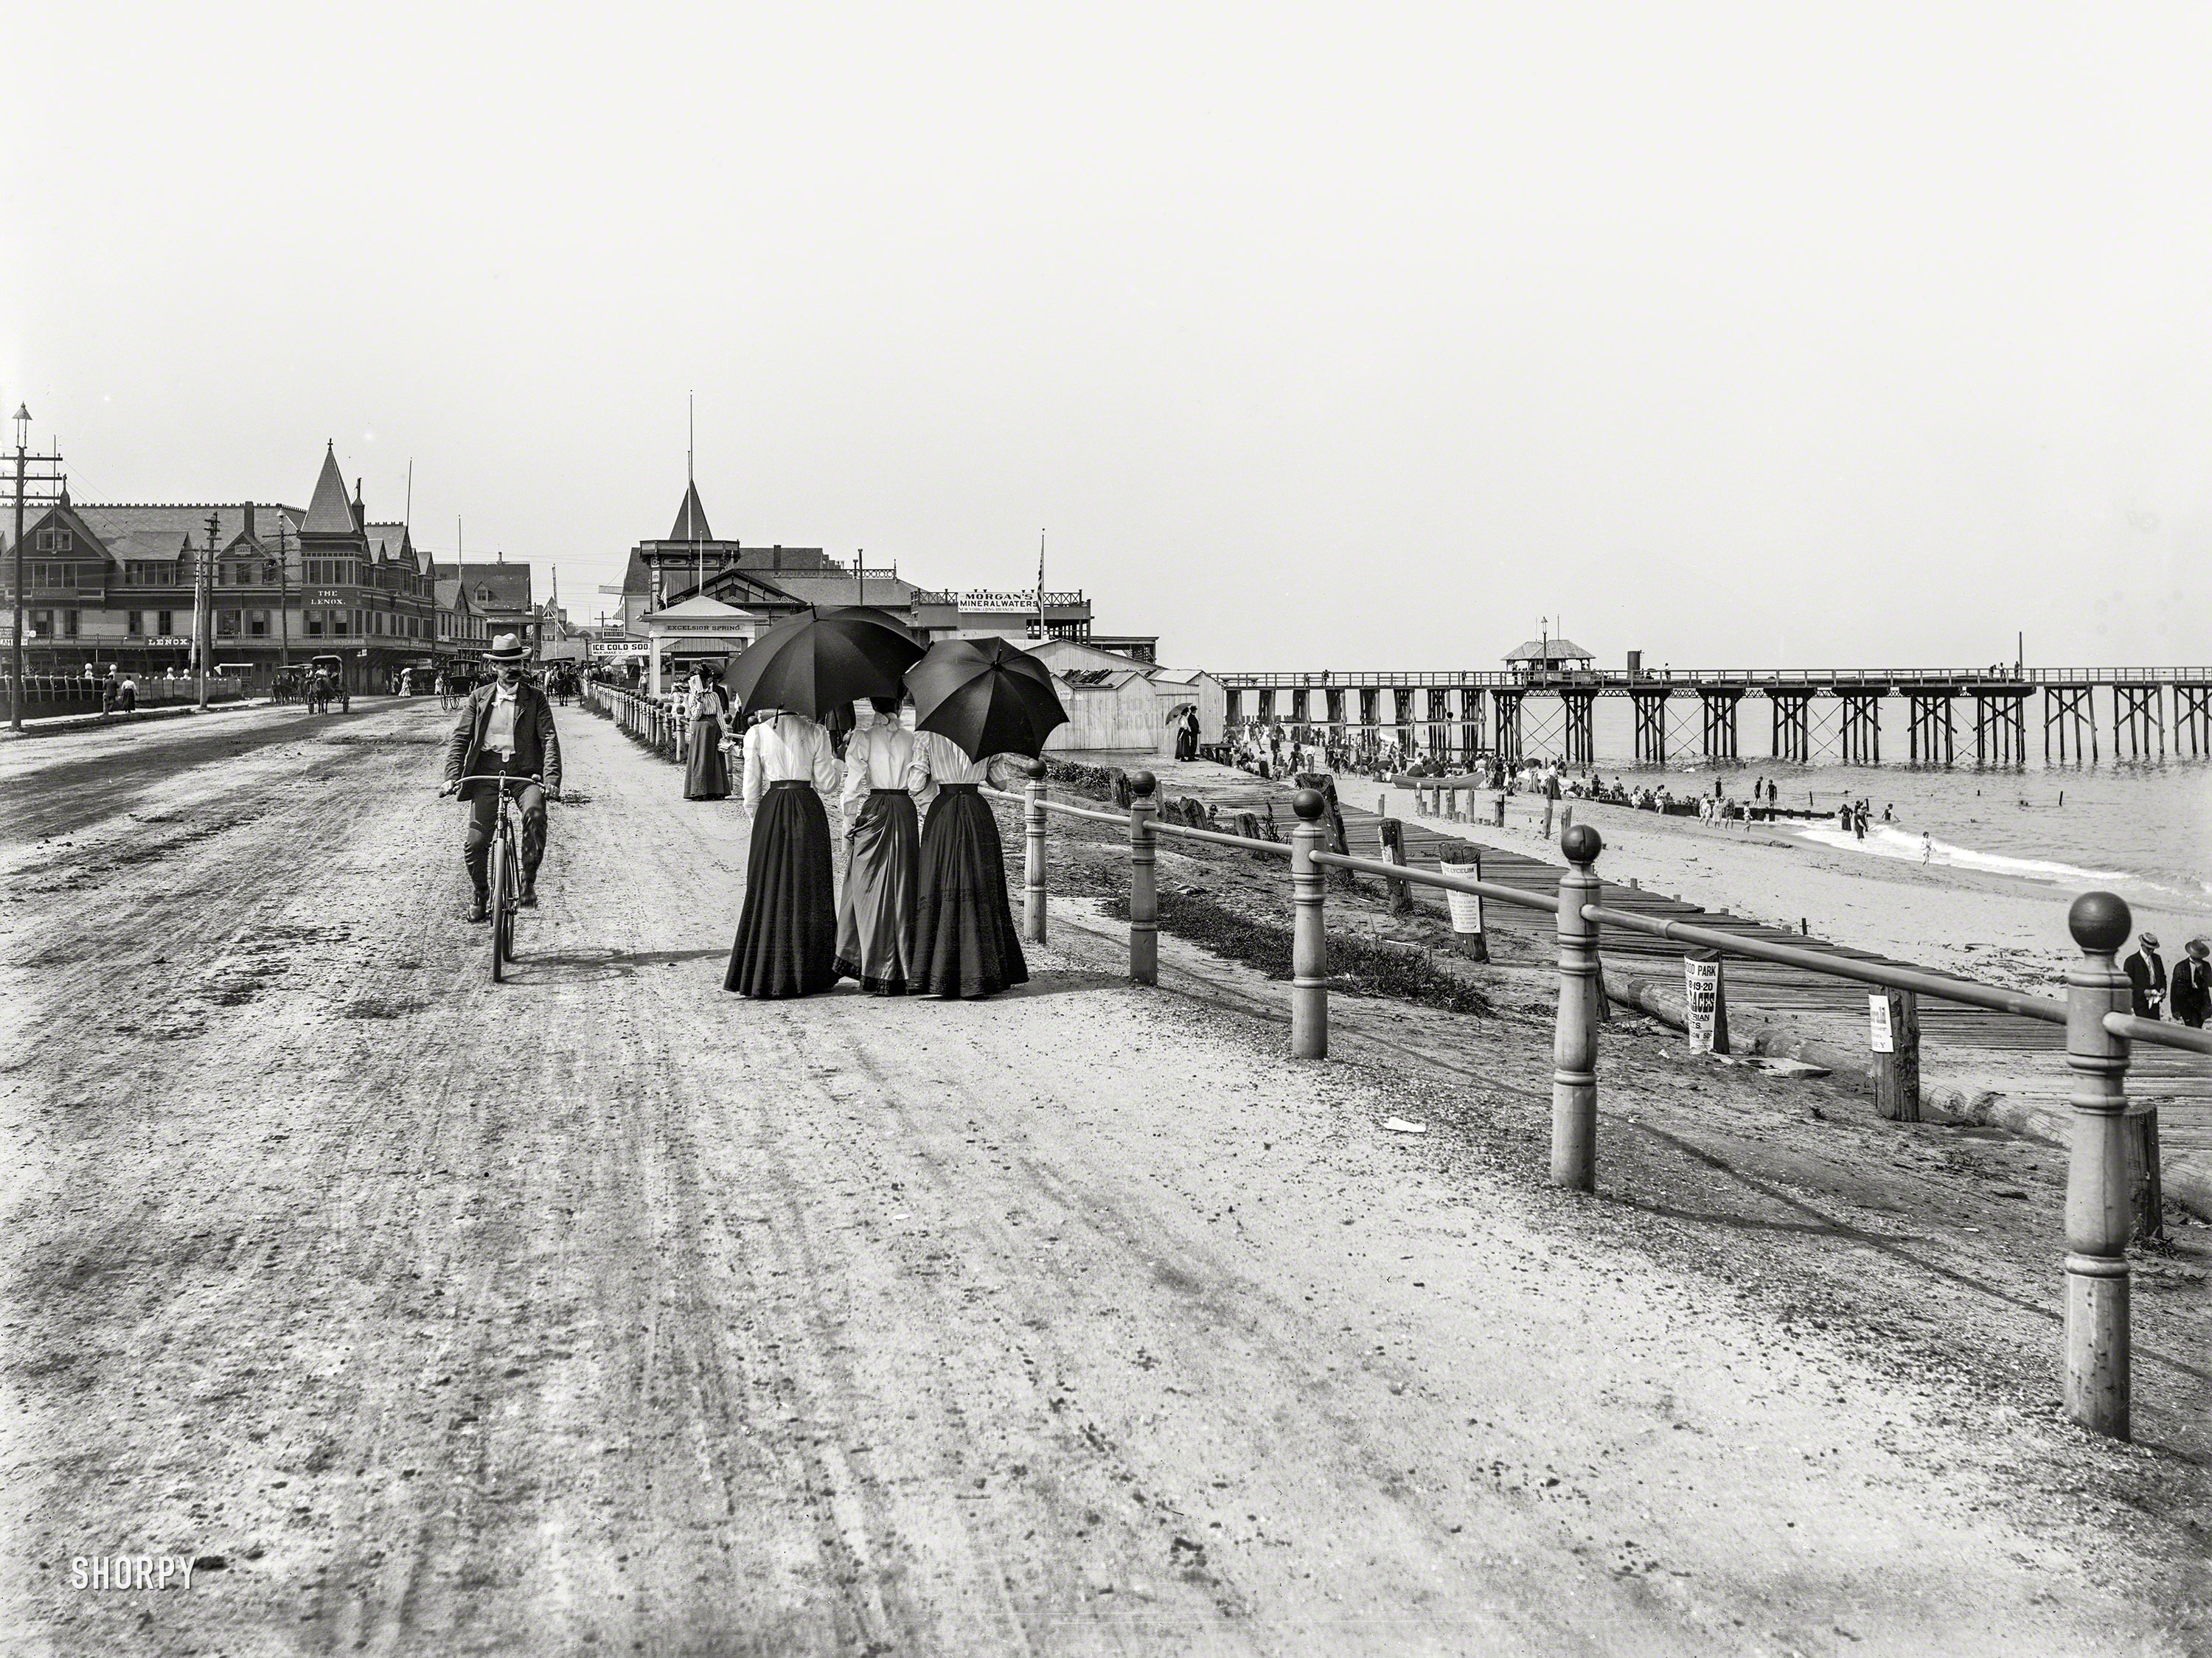 The Jersey Shore circa 1901. "Driveway and beach at Long Branch." 8x10 inch dry plate glass negative, Detroit Publishing Company. View full size.